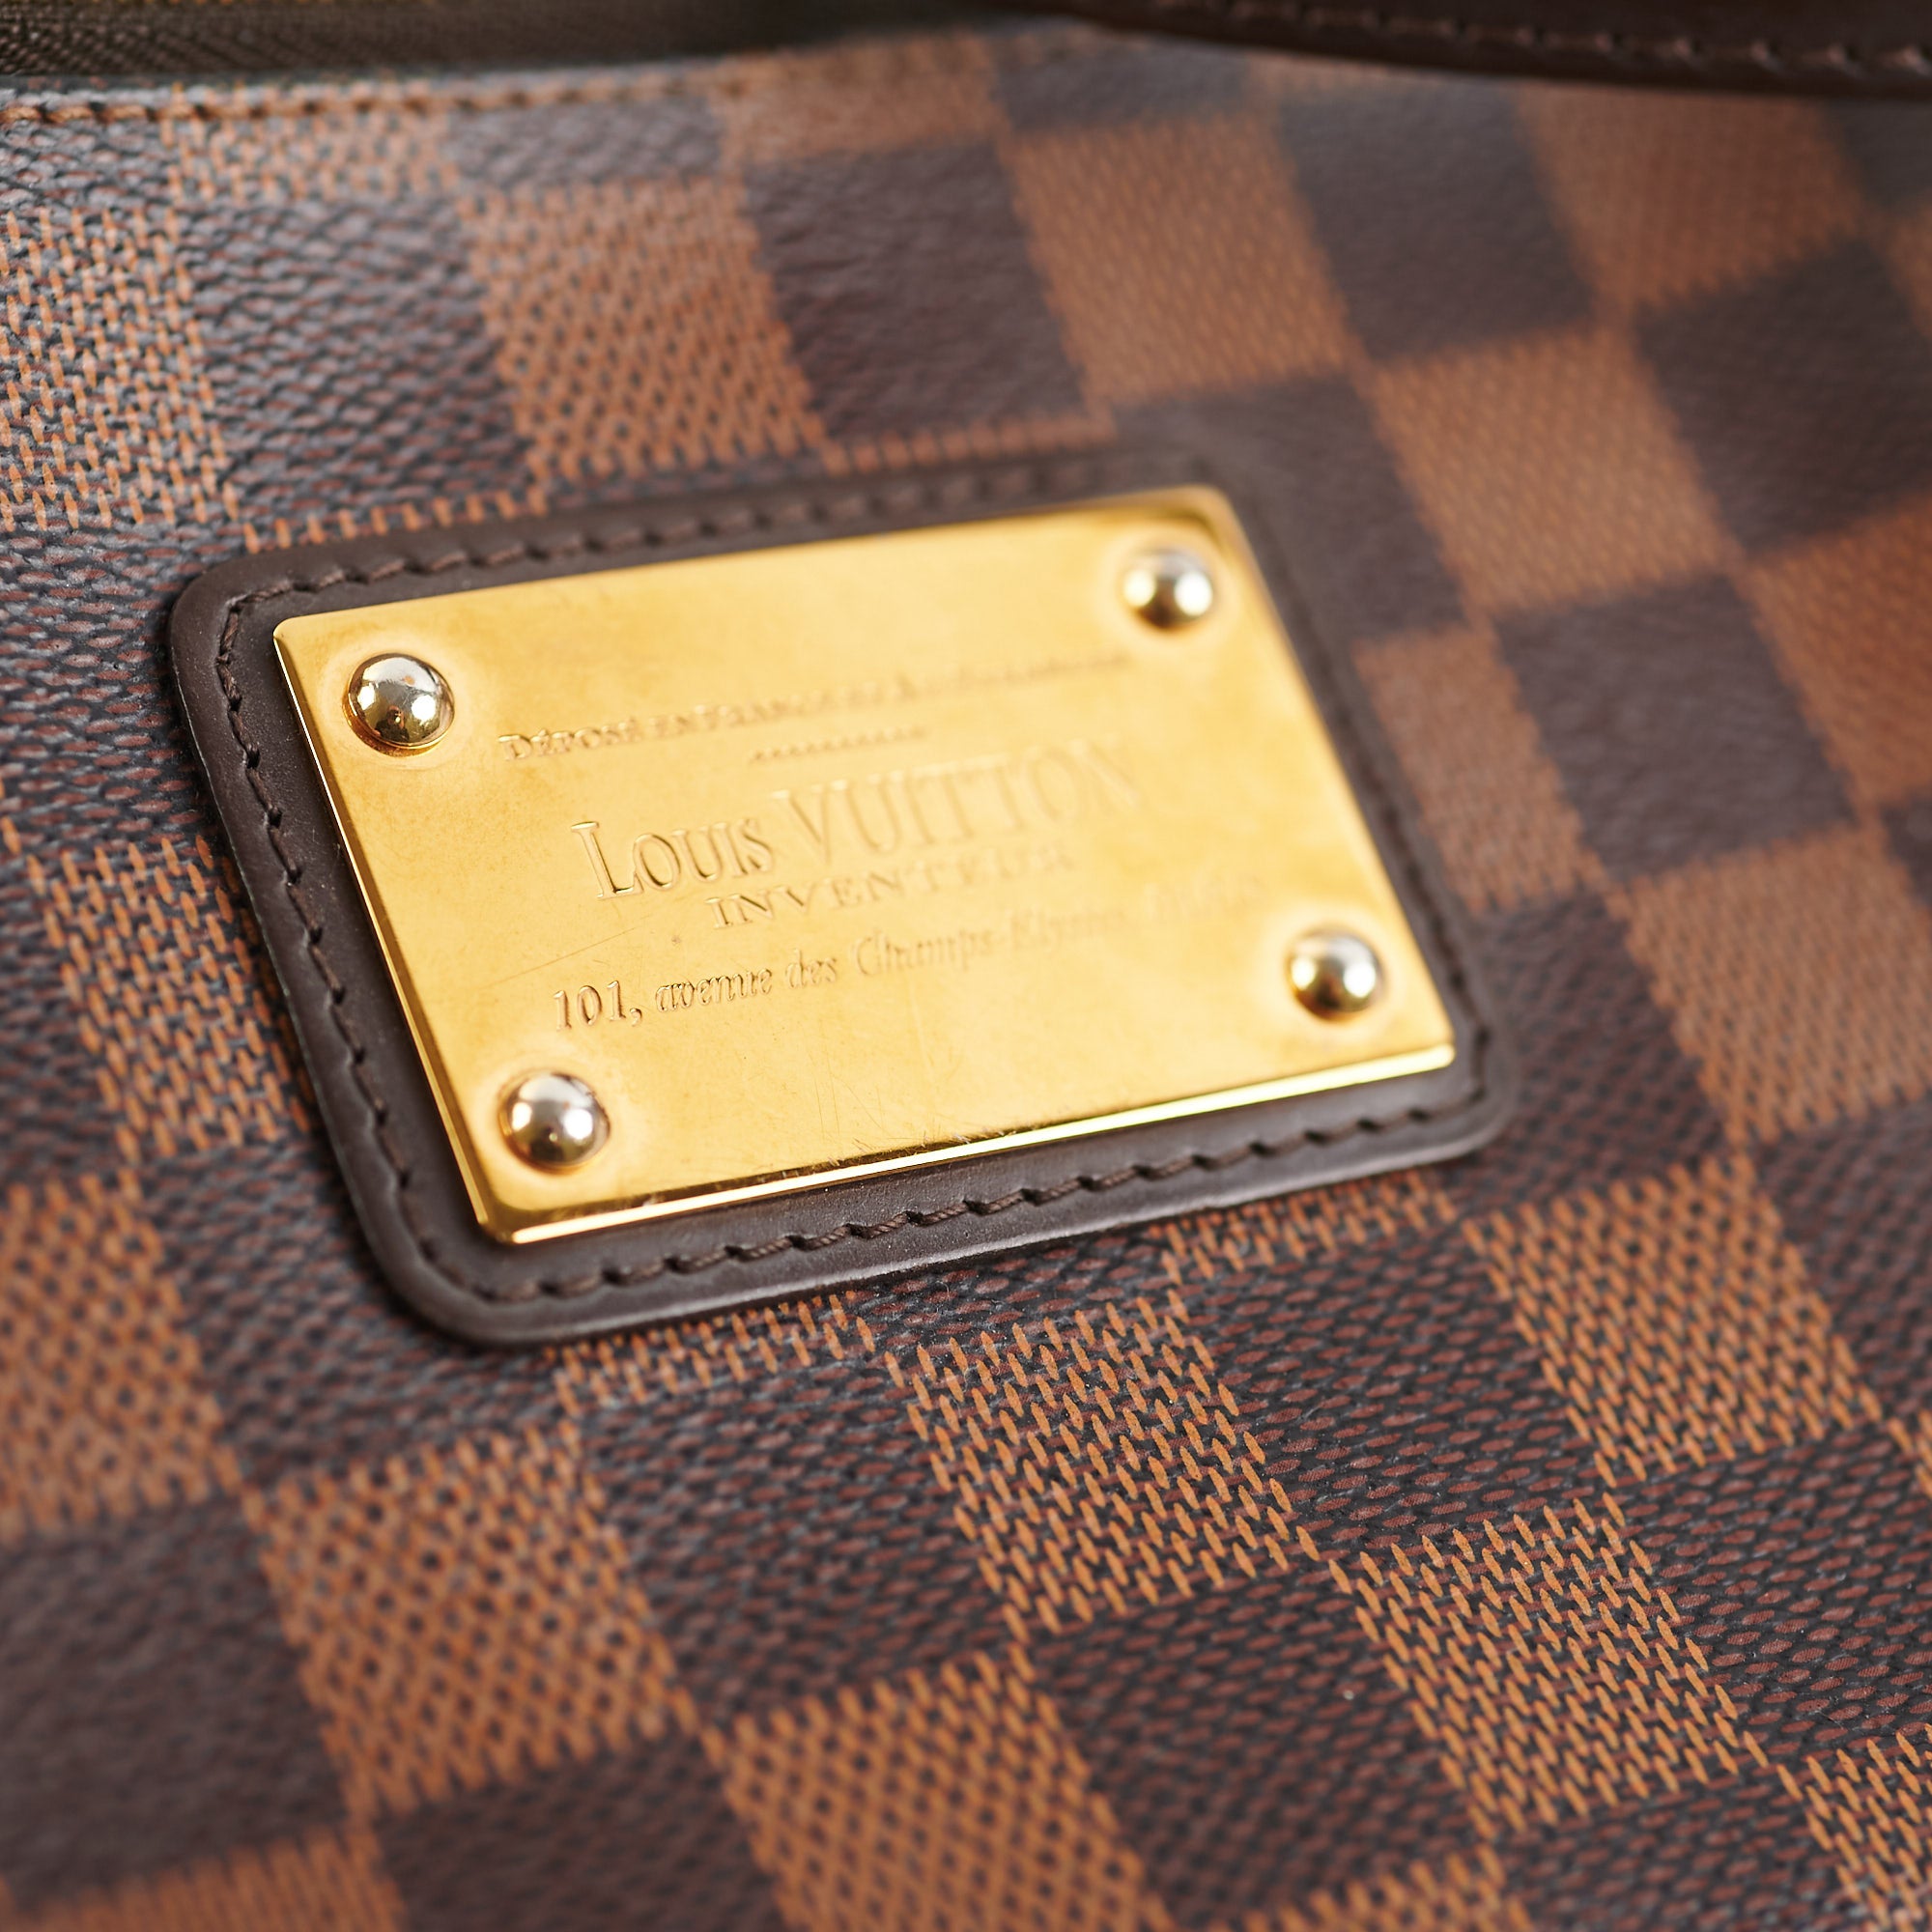 LV Eva Clutch with Chain and Strap in Damier Ebene Canvas GHW – Brands Lover